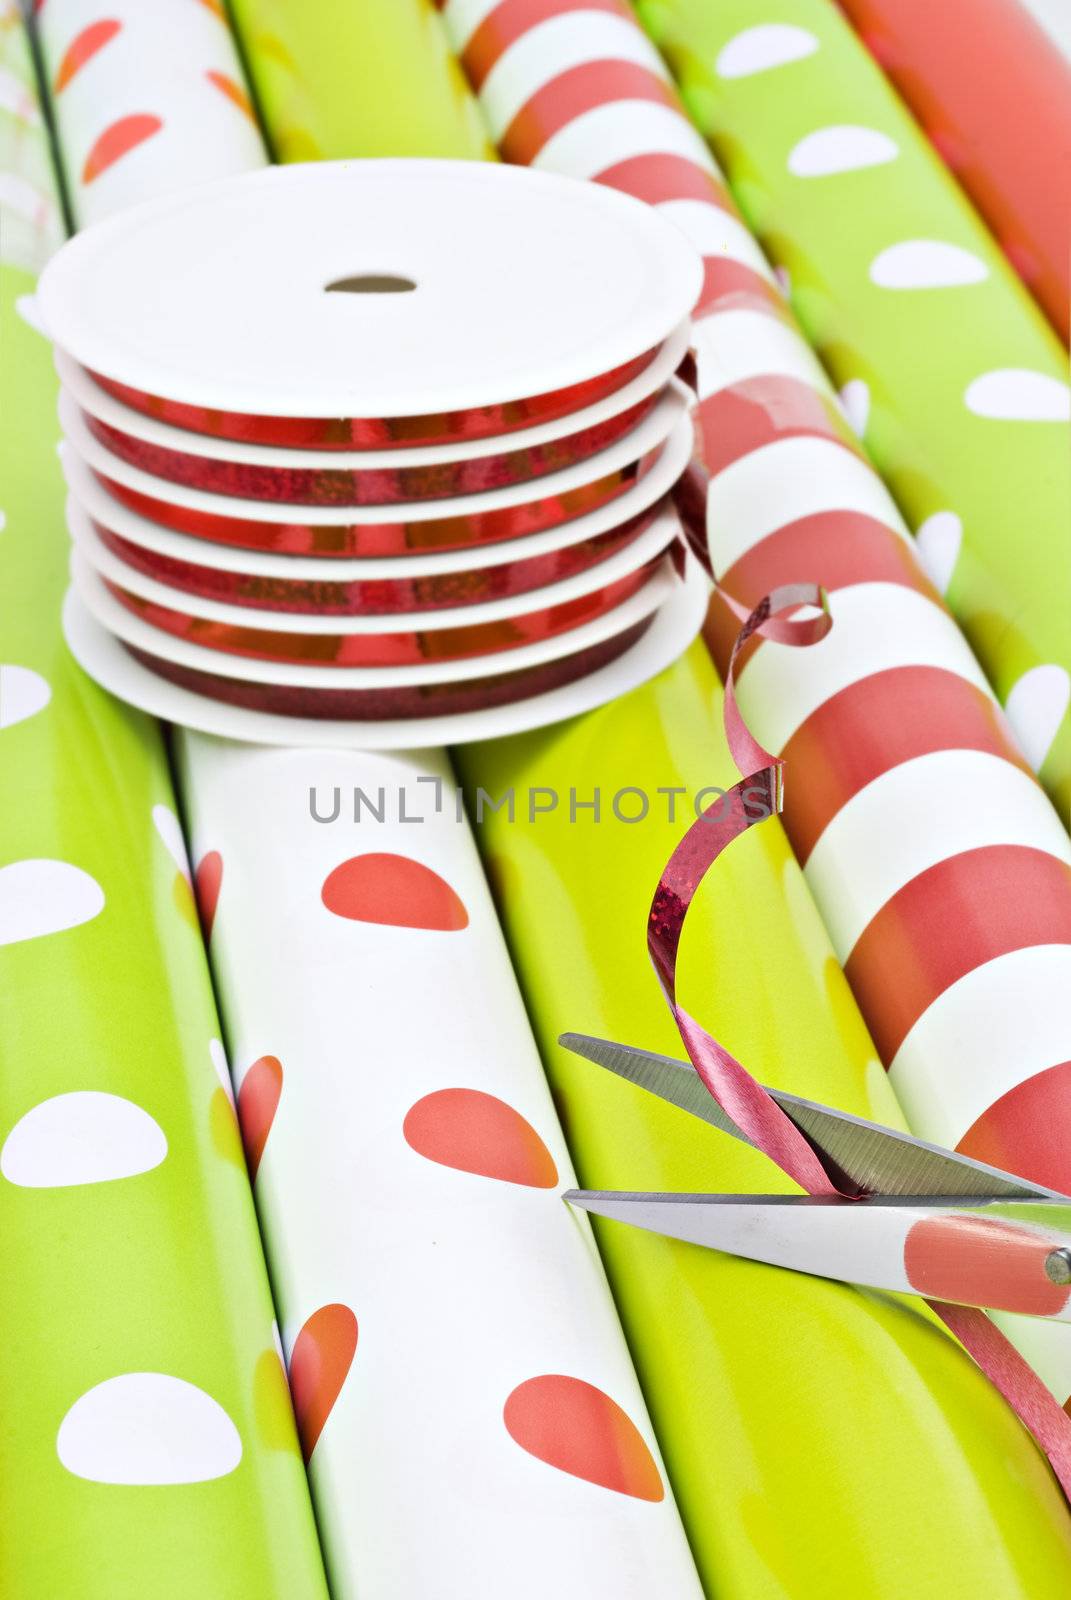 Rolls of gift wrapping paper and rolls of ribbon